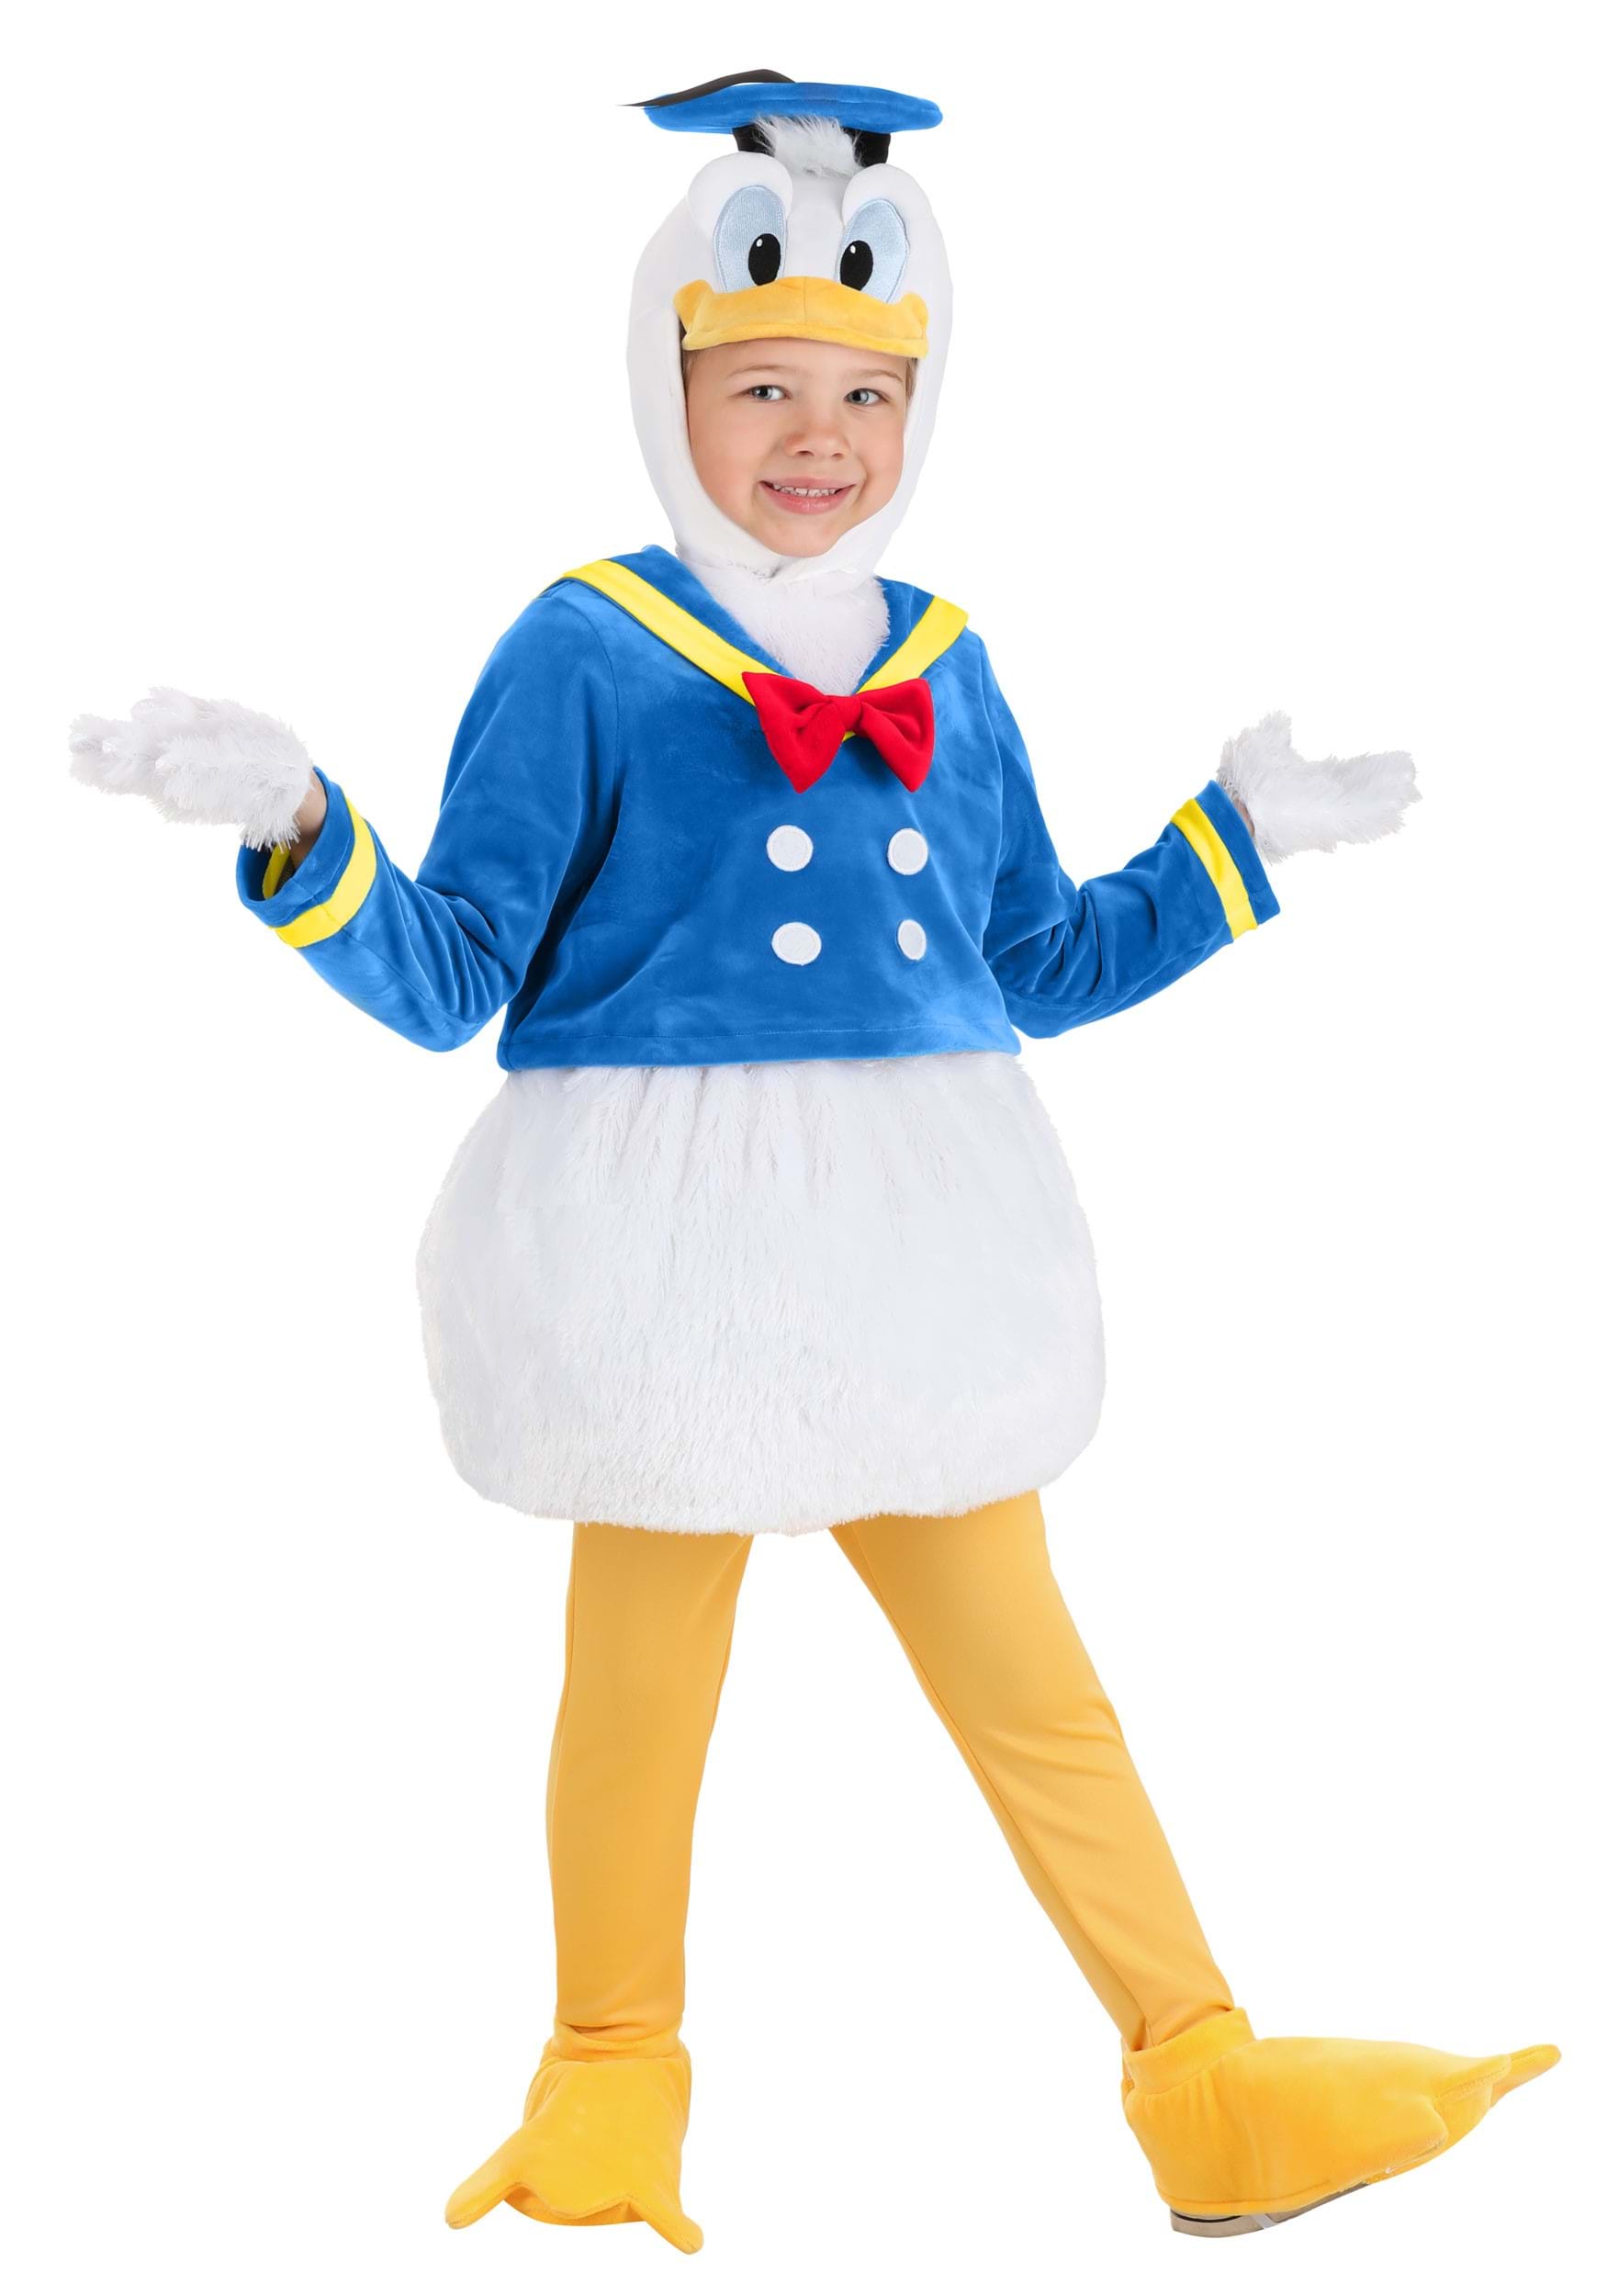 Photos - Fancy Dress FUN Costumes Donald Duck Costume for Toddlers Orange/Blue/White